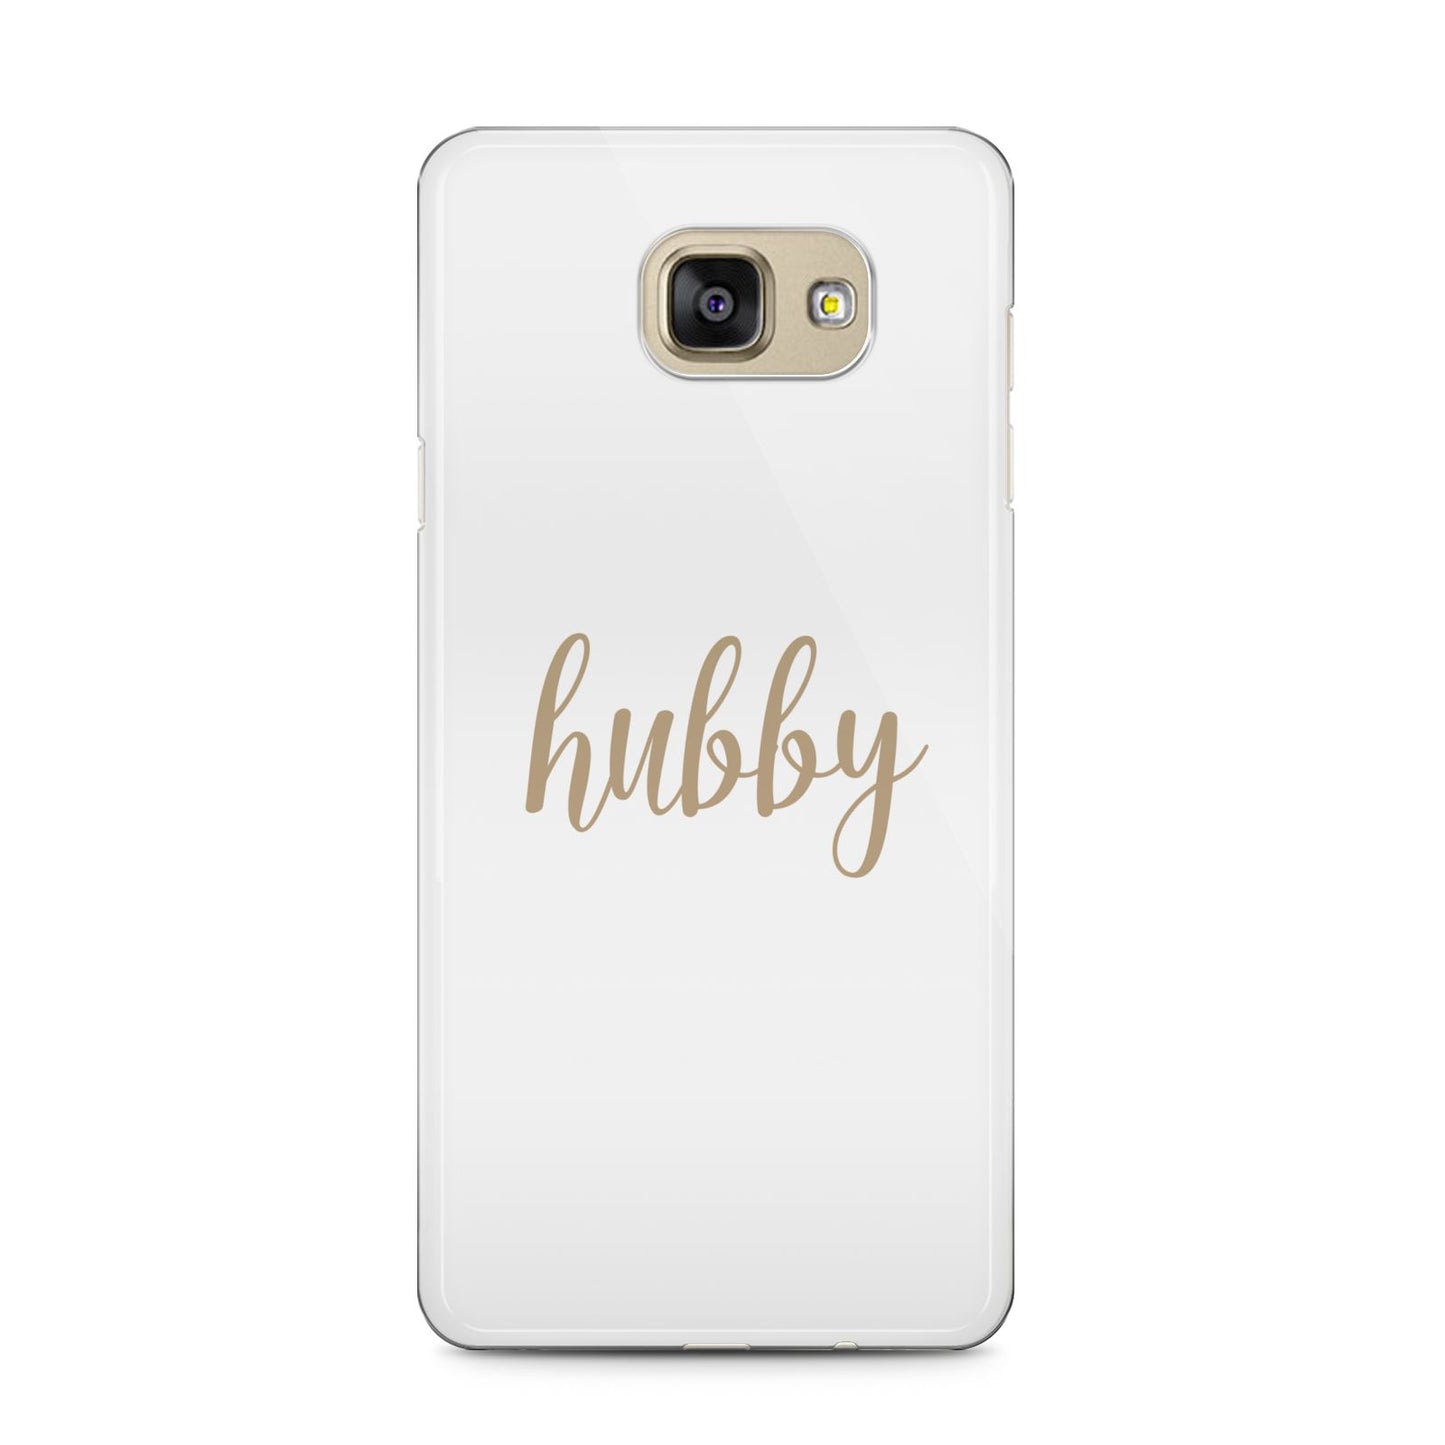 Hubby Samsung Galaxy A5 2016 Case on gold phone